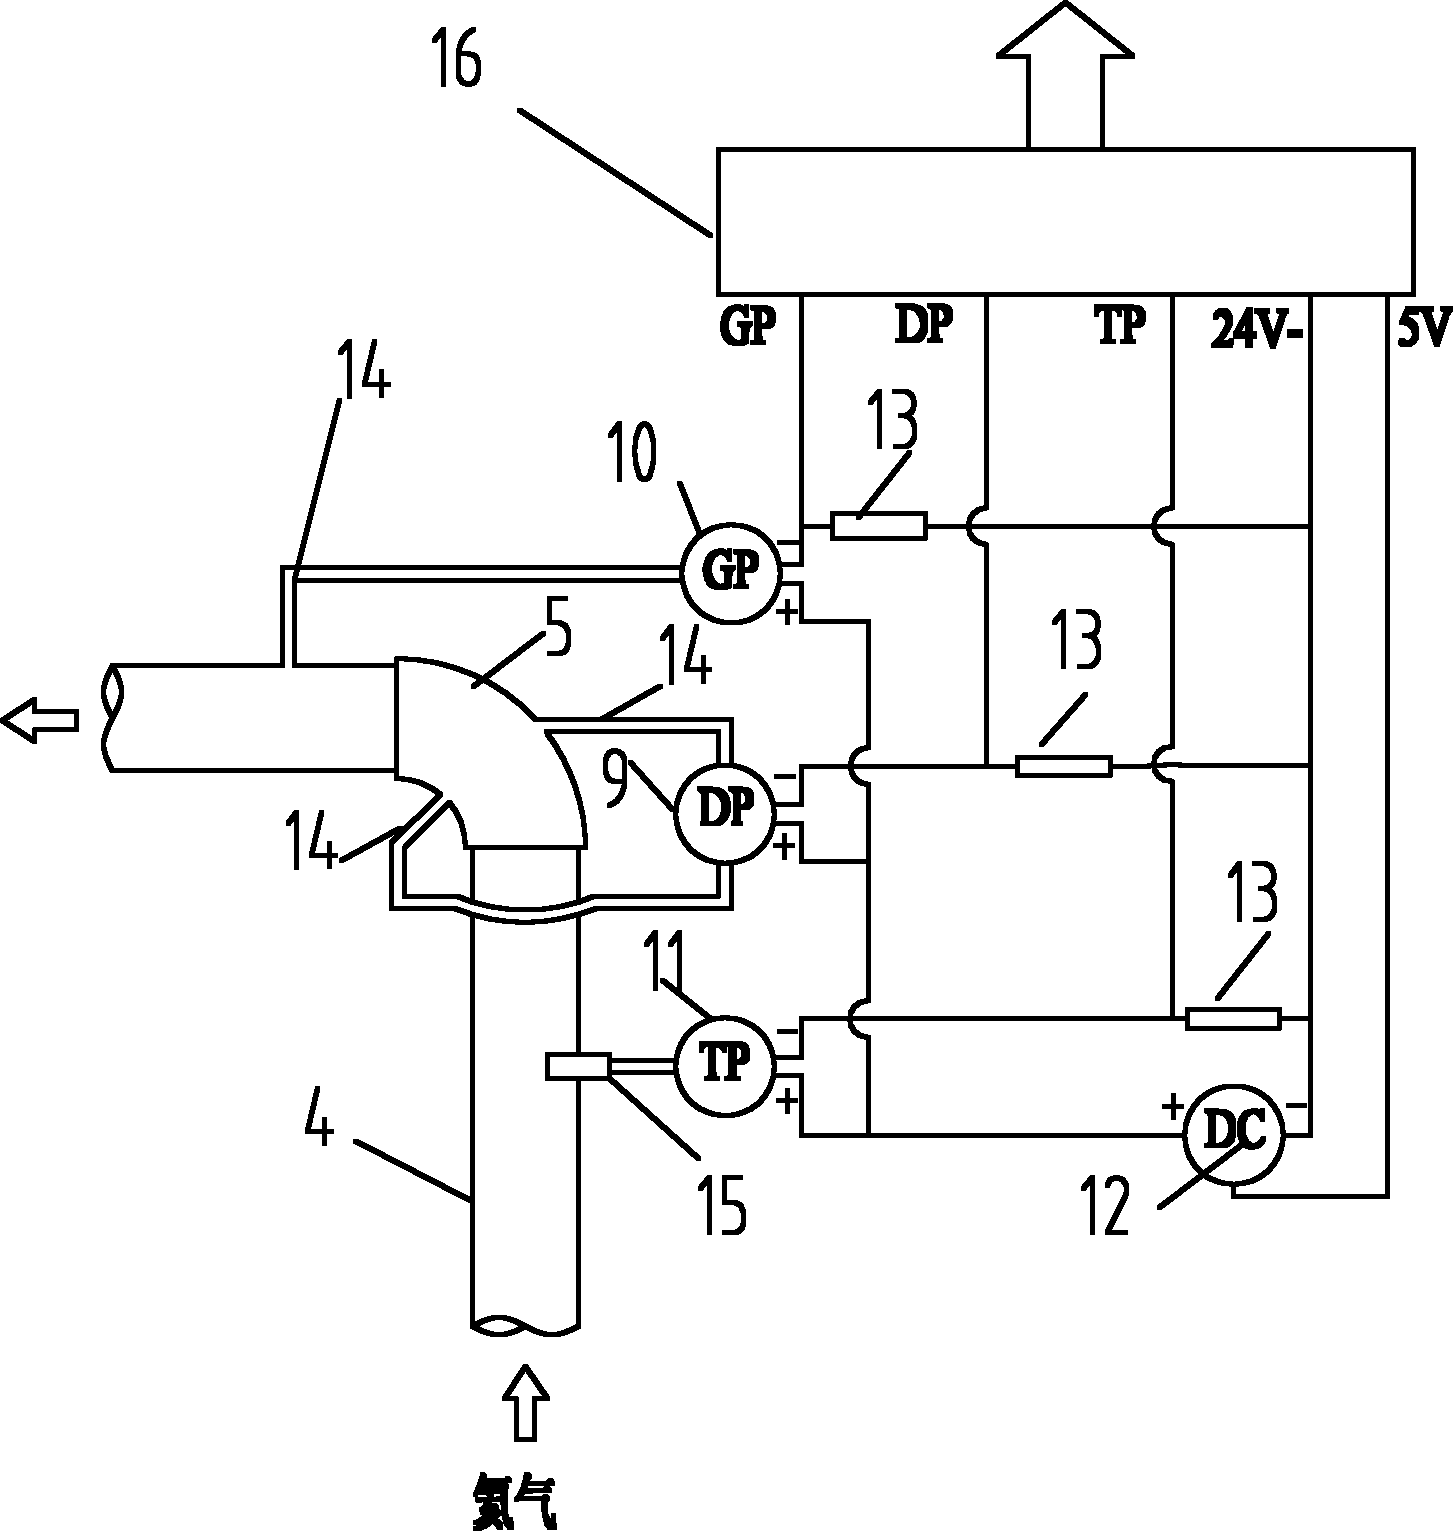 System and method for directly measuring total helium mass flow rate of primary loop of high-temperature gas cooled reactor